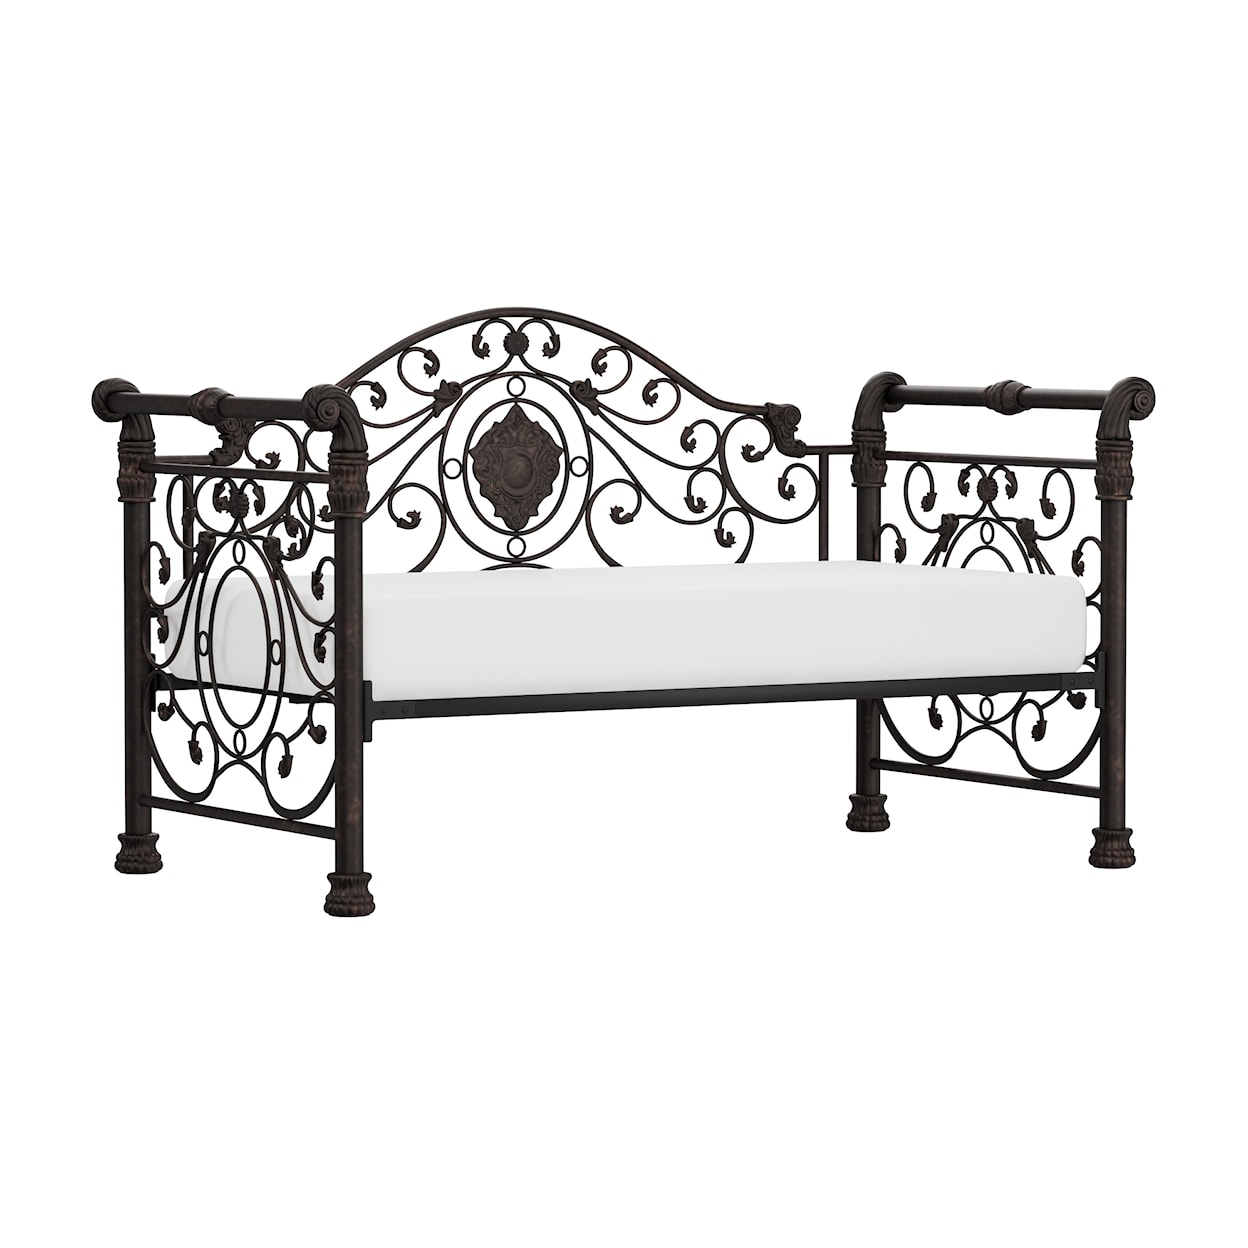 Hillsdale Mercer Twin Daybed